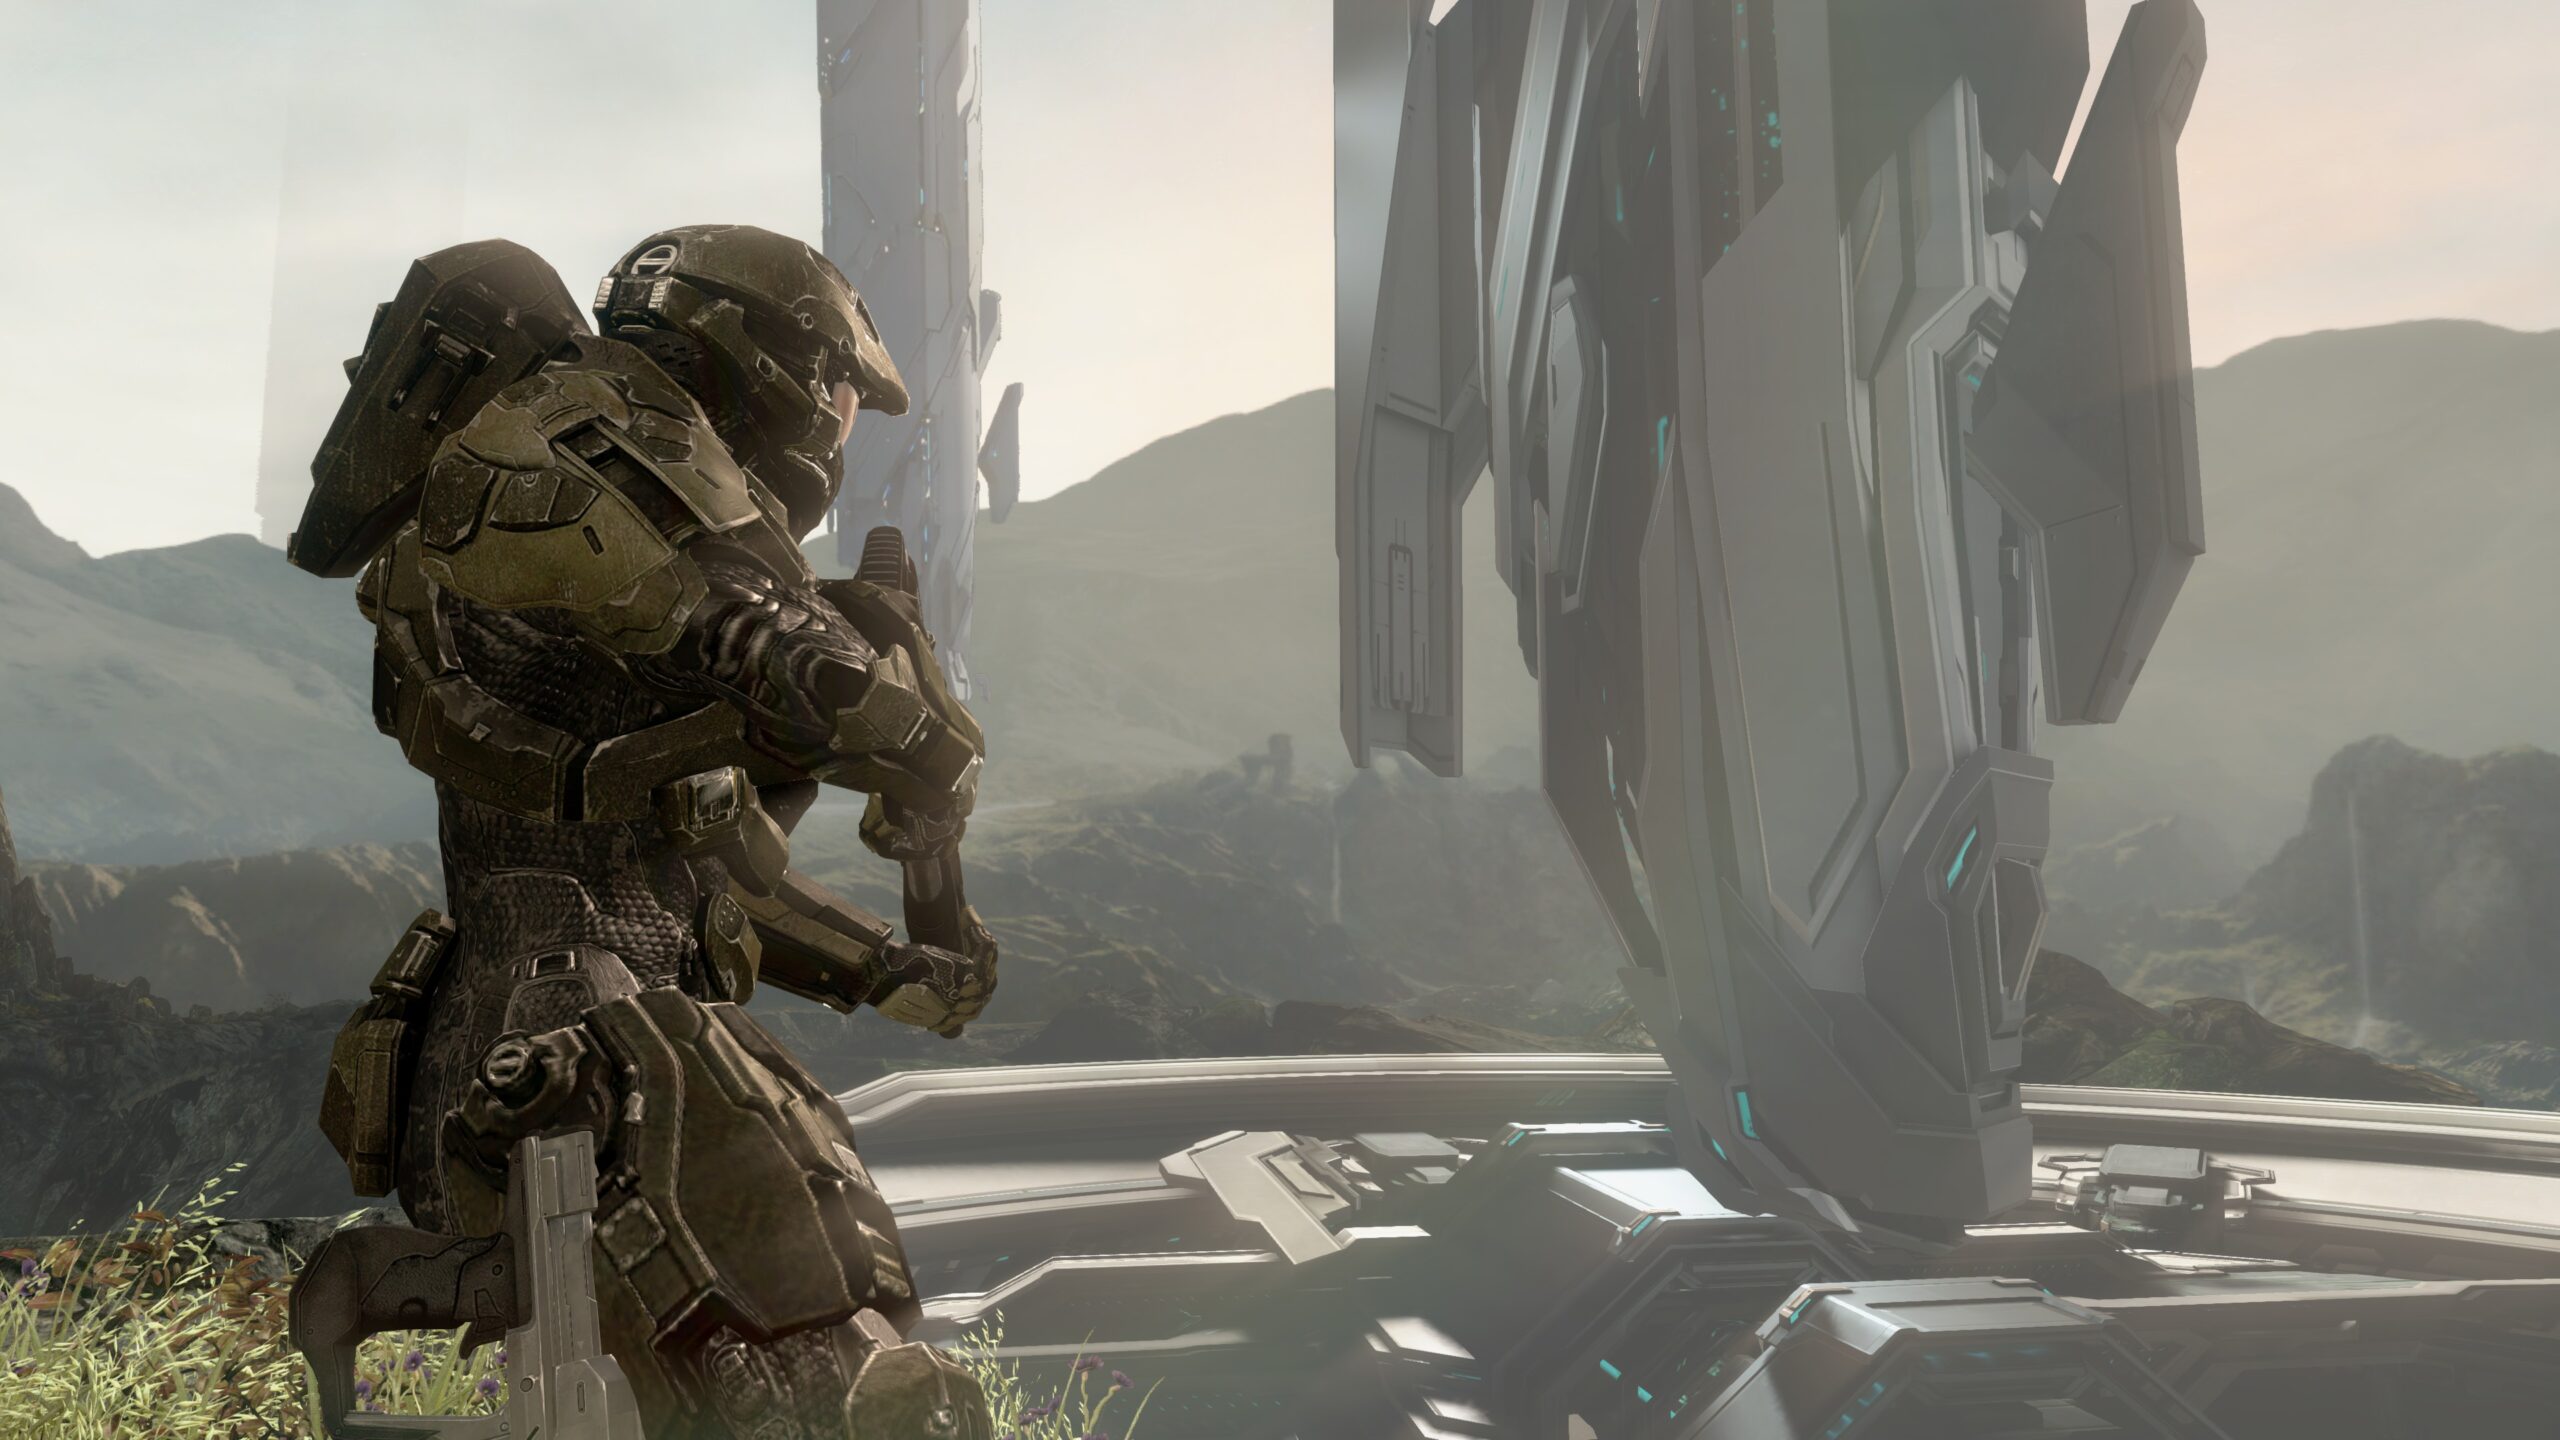 Halo 4 in-game screenshot of the Master Chief gazing out at the floating spires of Requiem